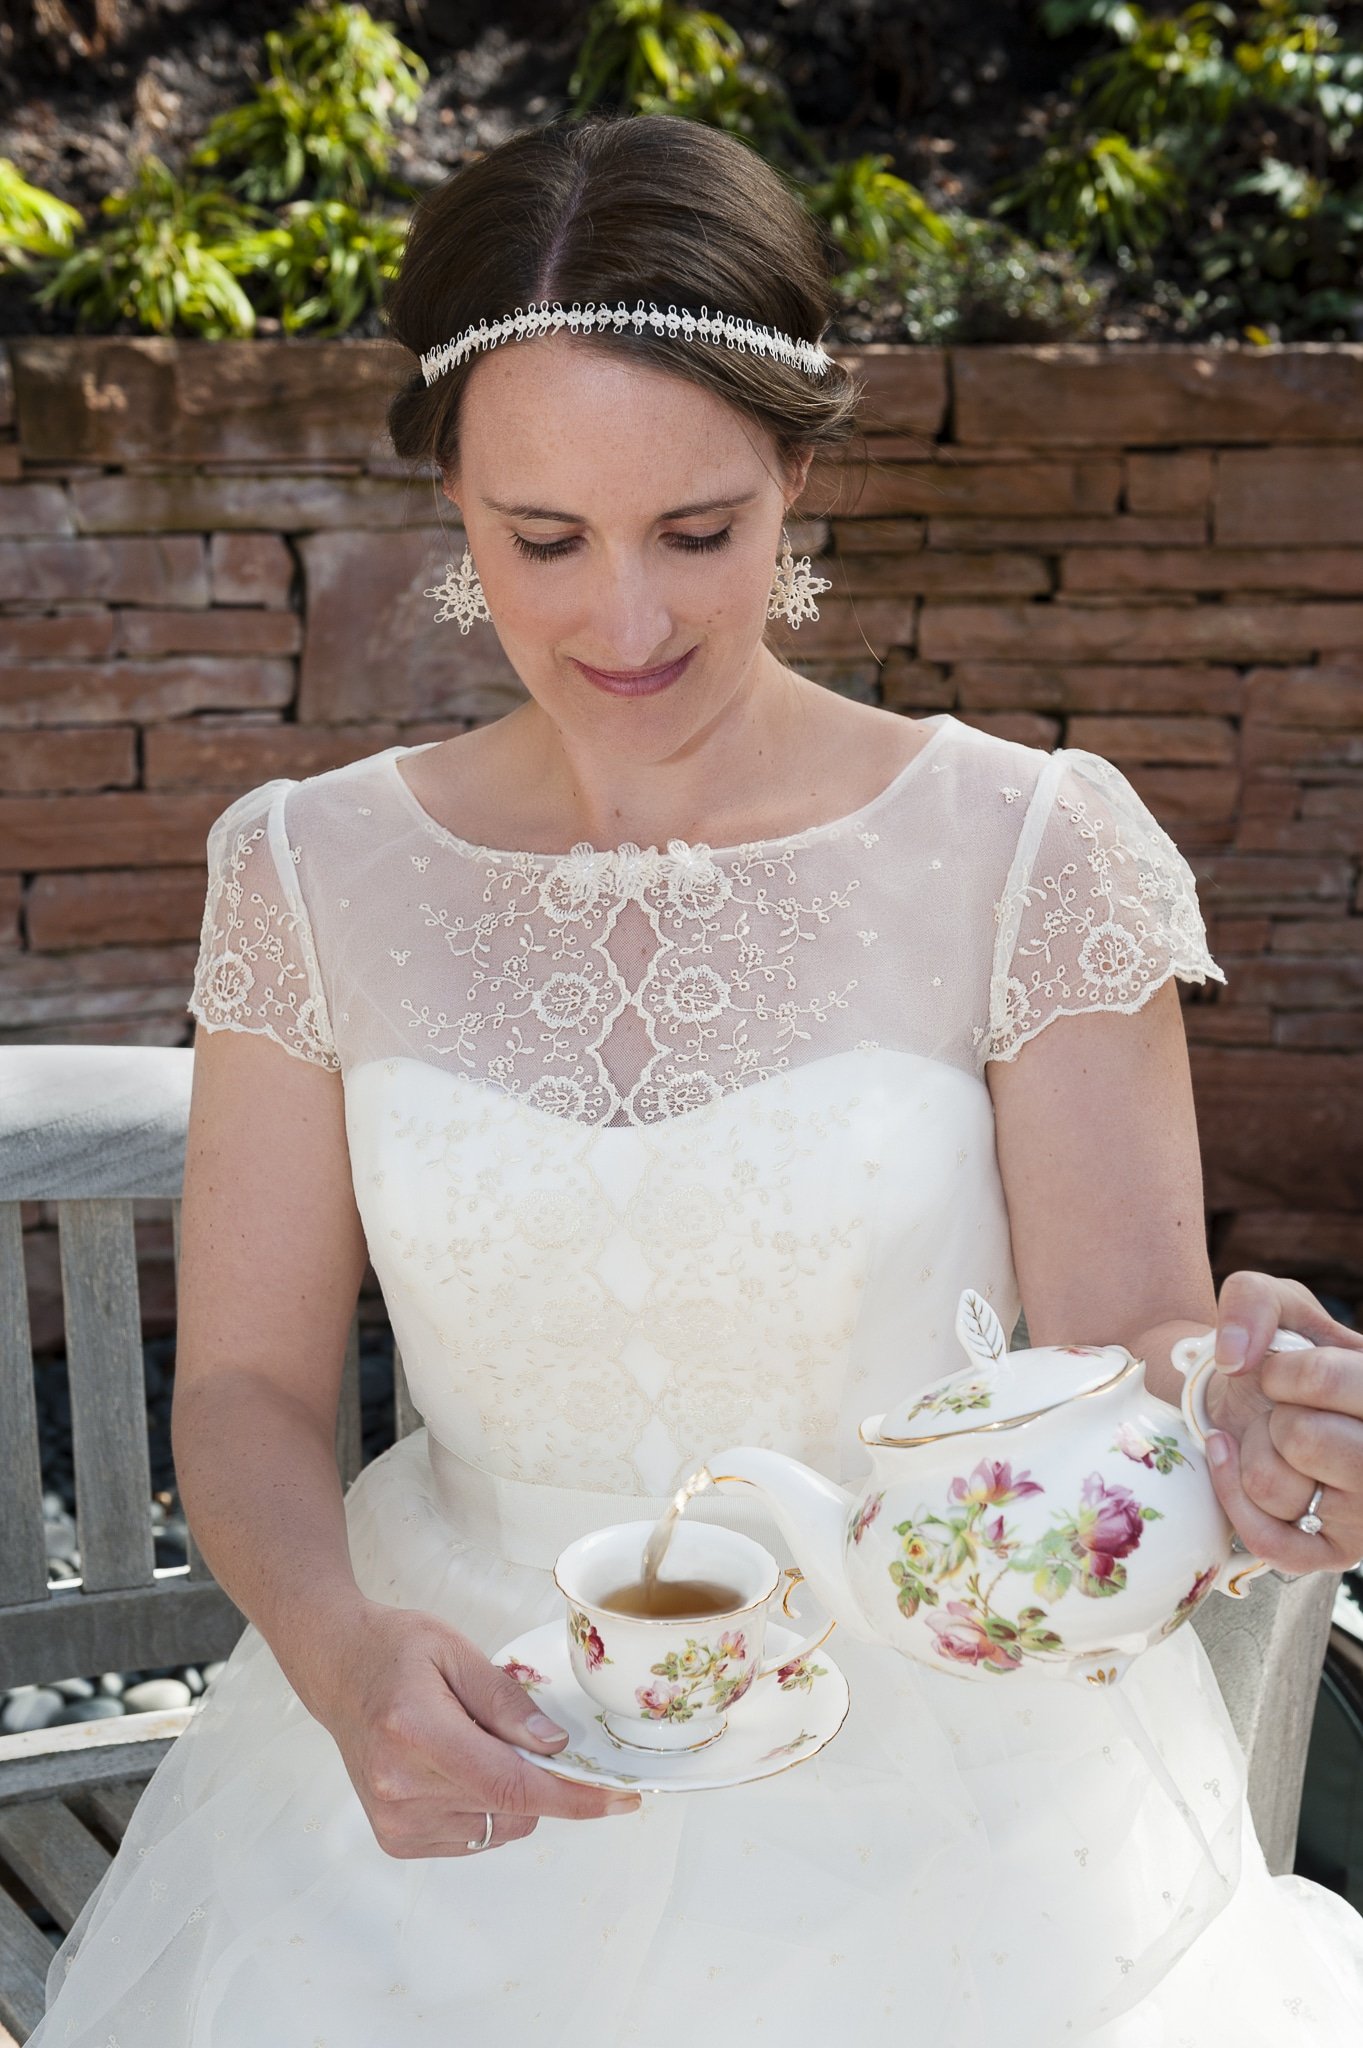 A bride-to-be in wedding attire pours tea from a traditional teapot during her bridal portrait session in a garden.